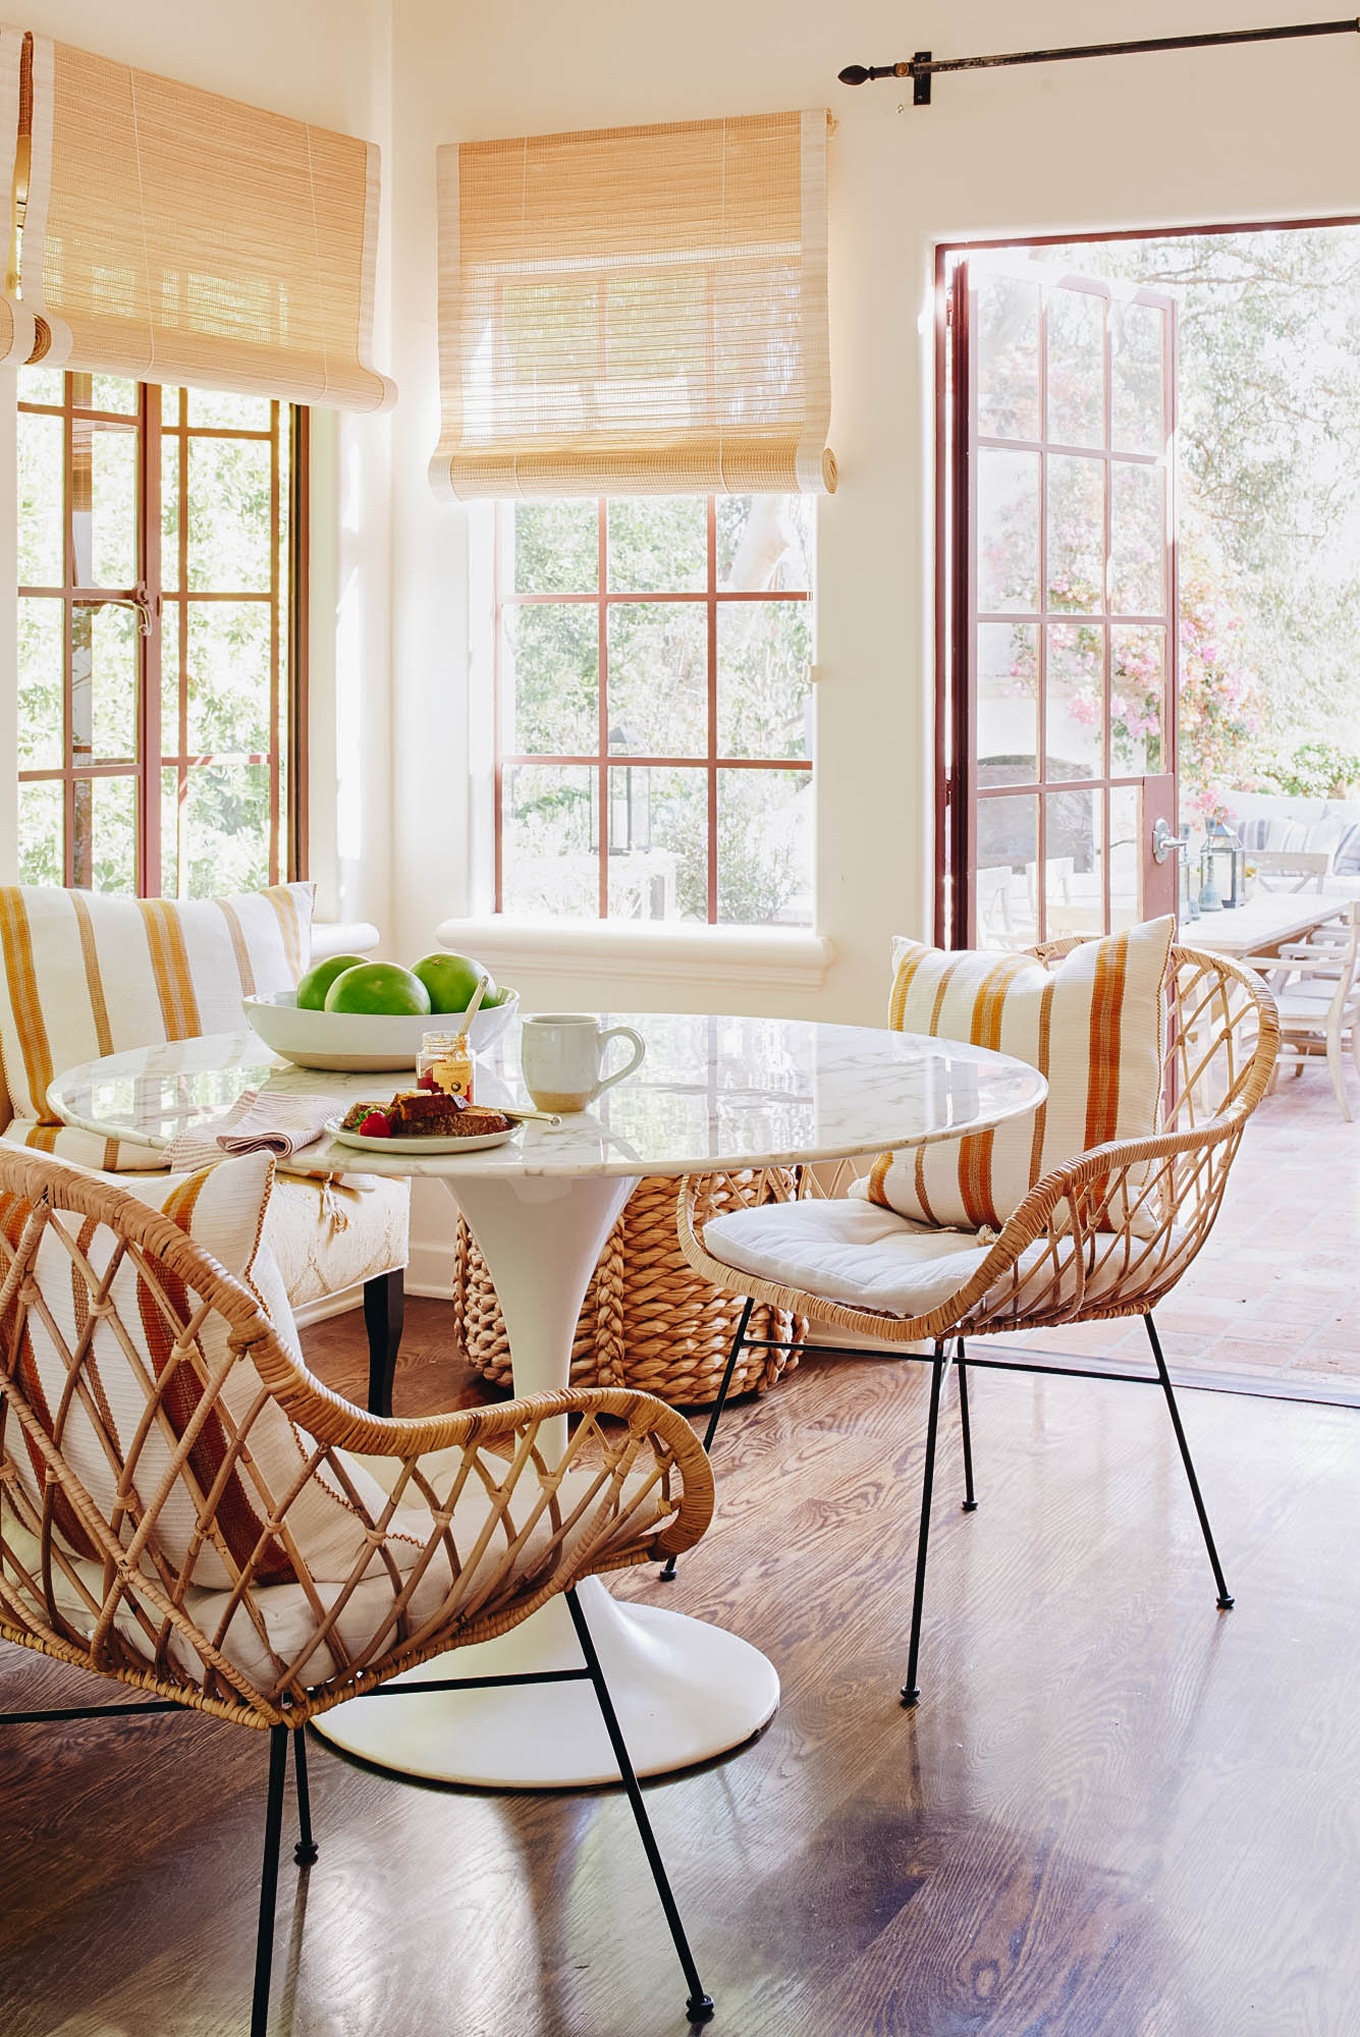 sunny breakfast nook with rattan chairs and tulip table | baja style in california house tour